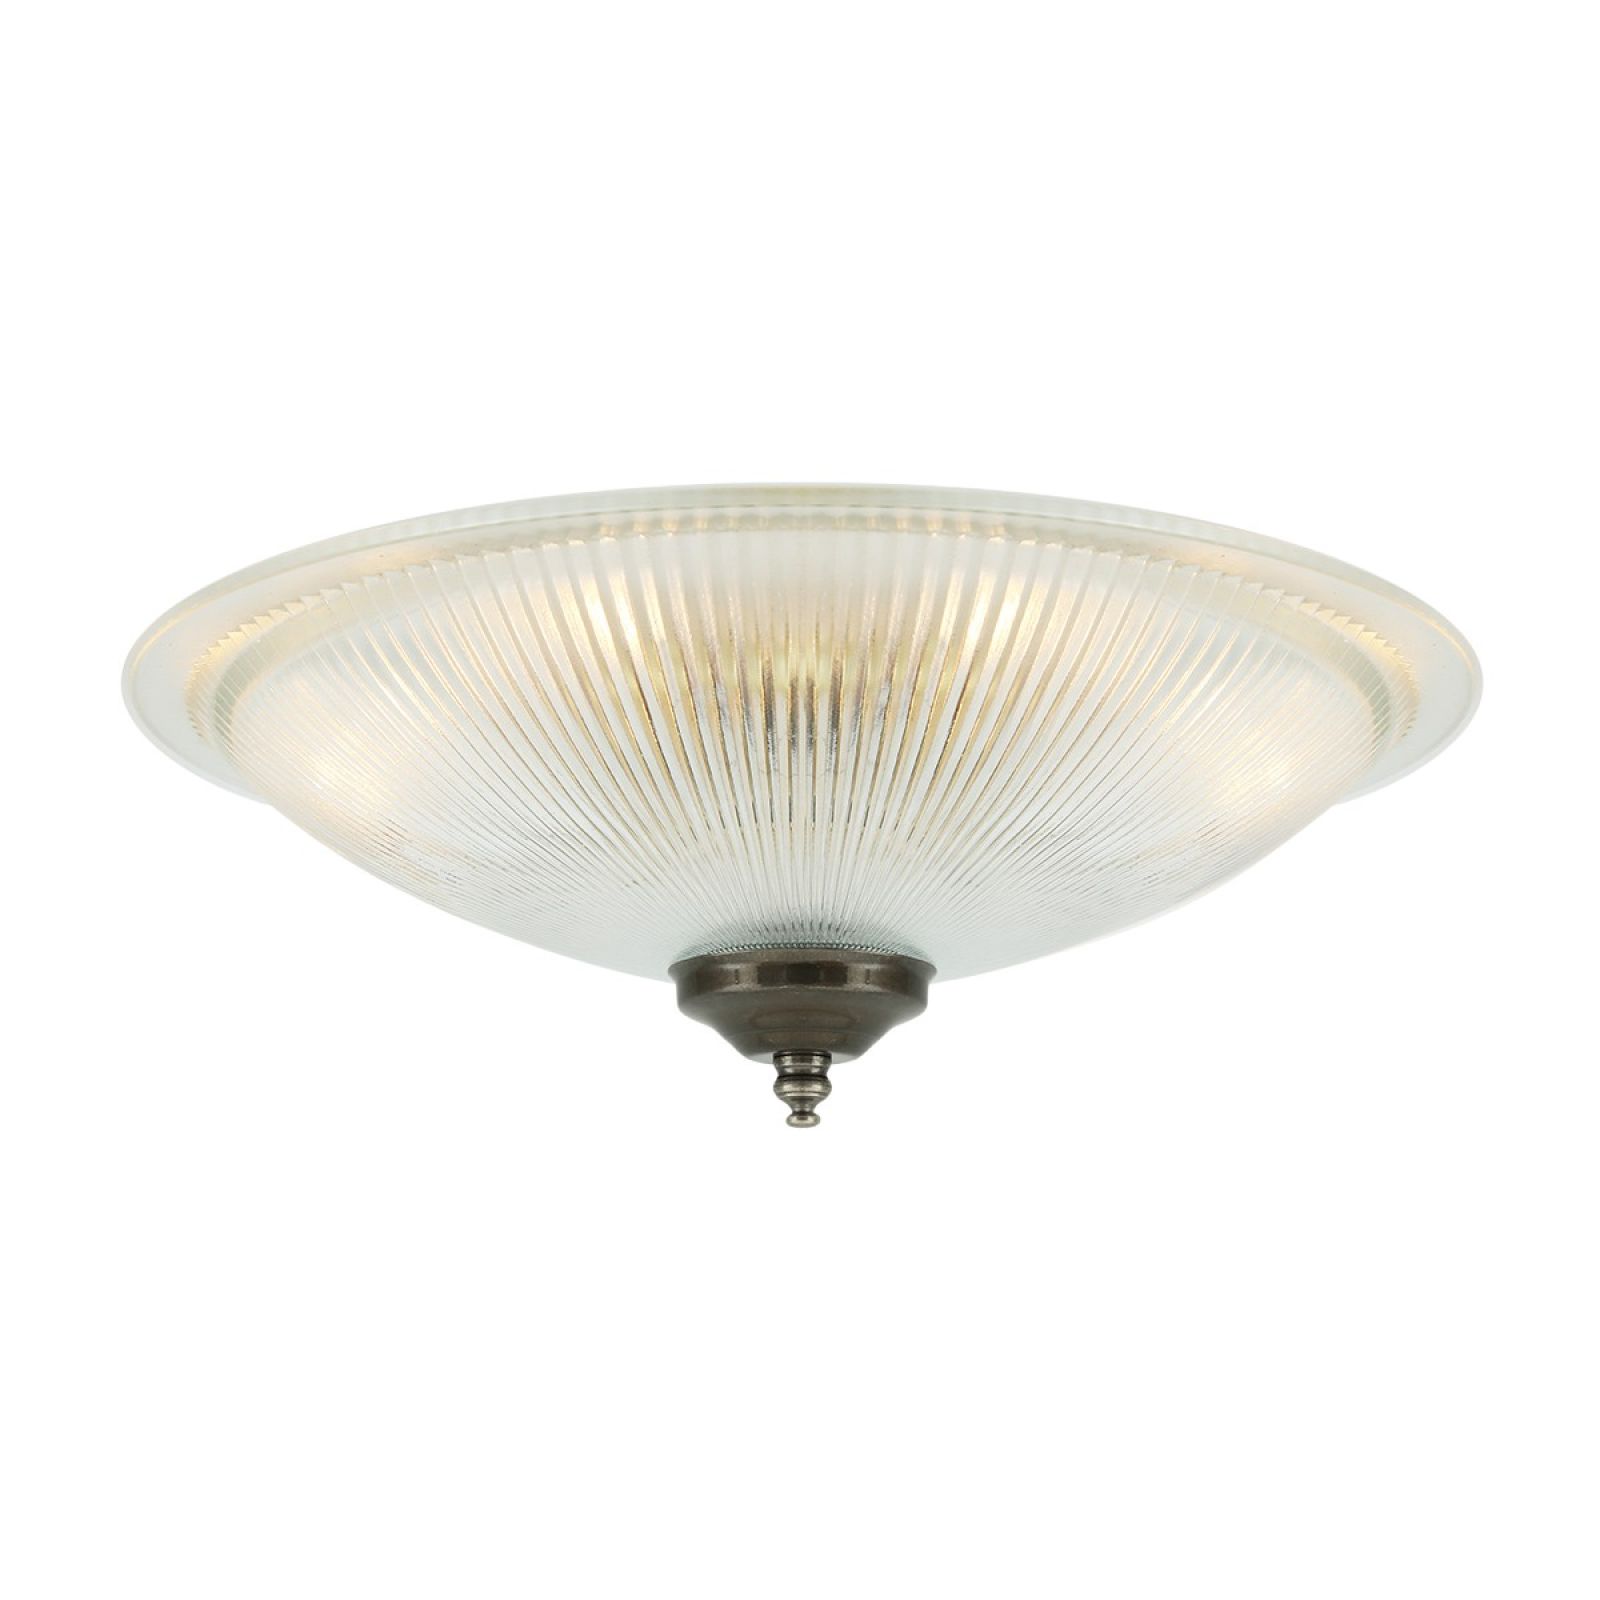 Nicosia Shallow Ceiling Light in a choice of finishes